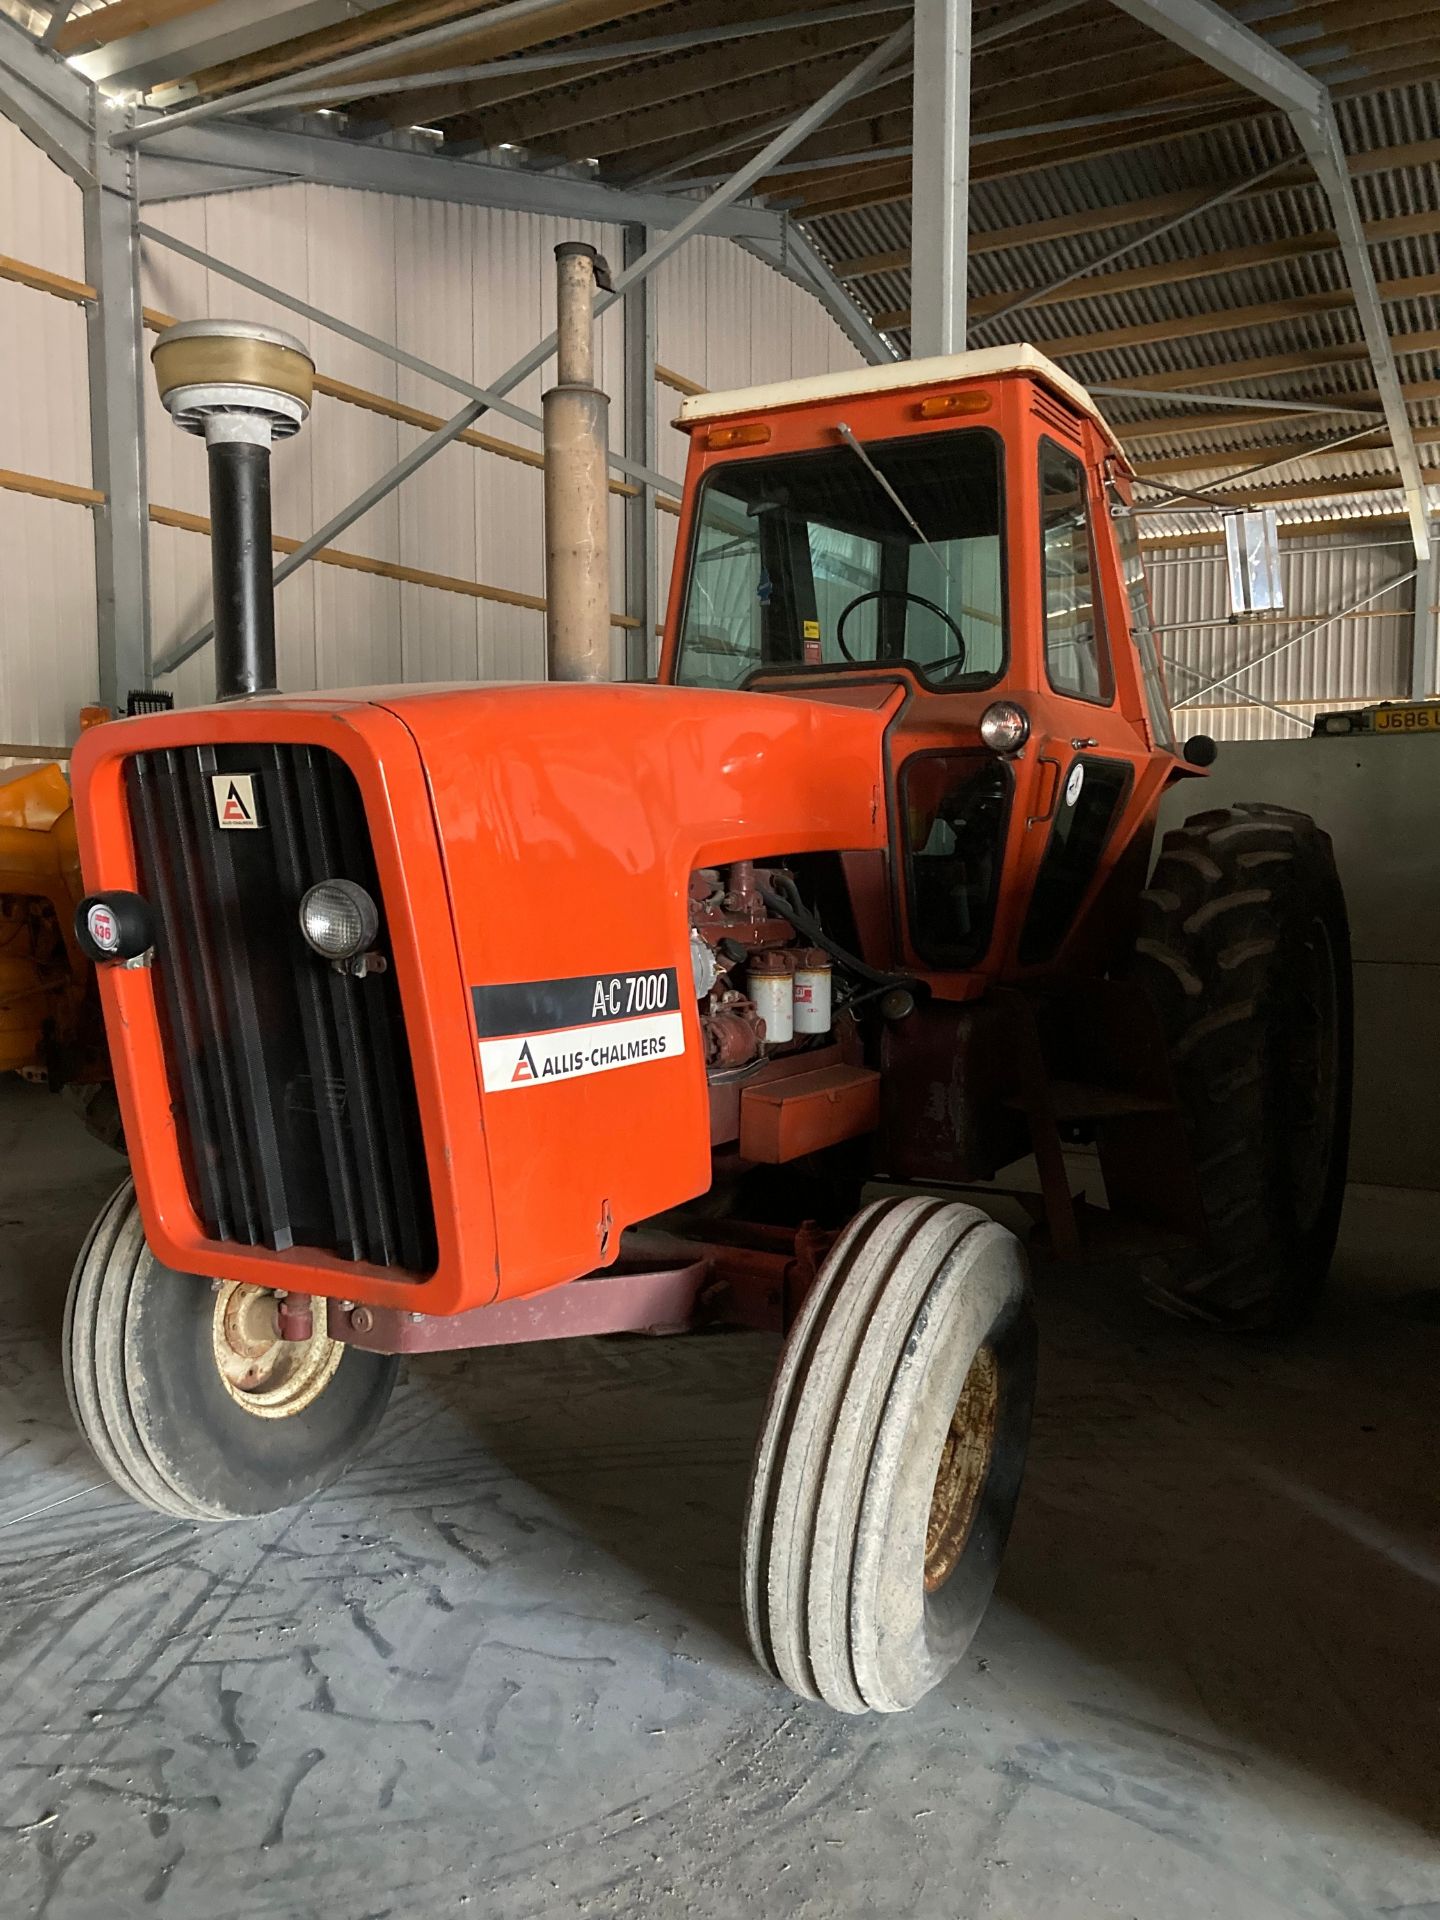 ALLIS CHALMERS AC7000 - Image 3 of 15